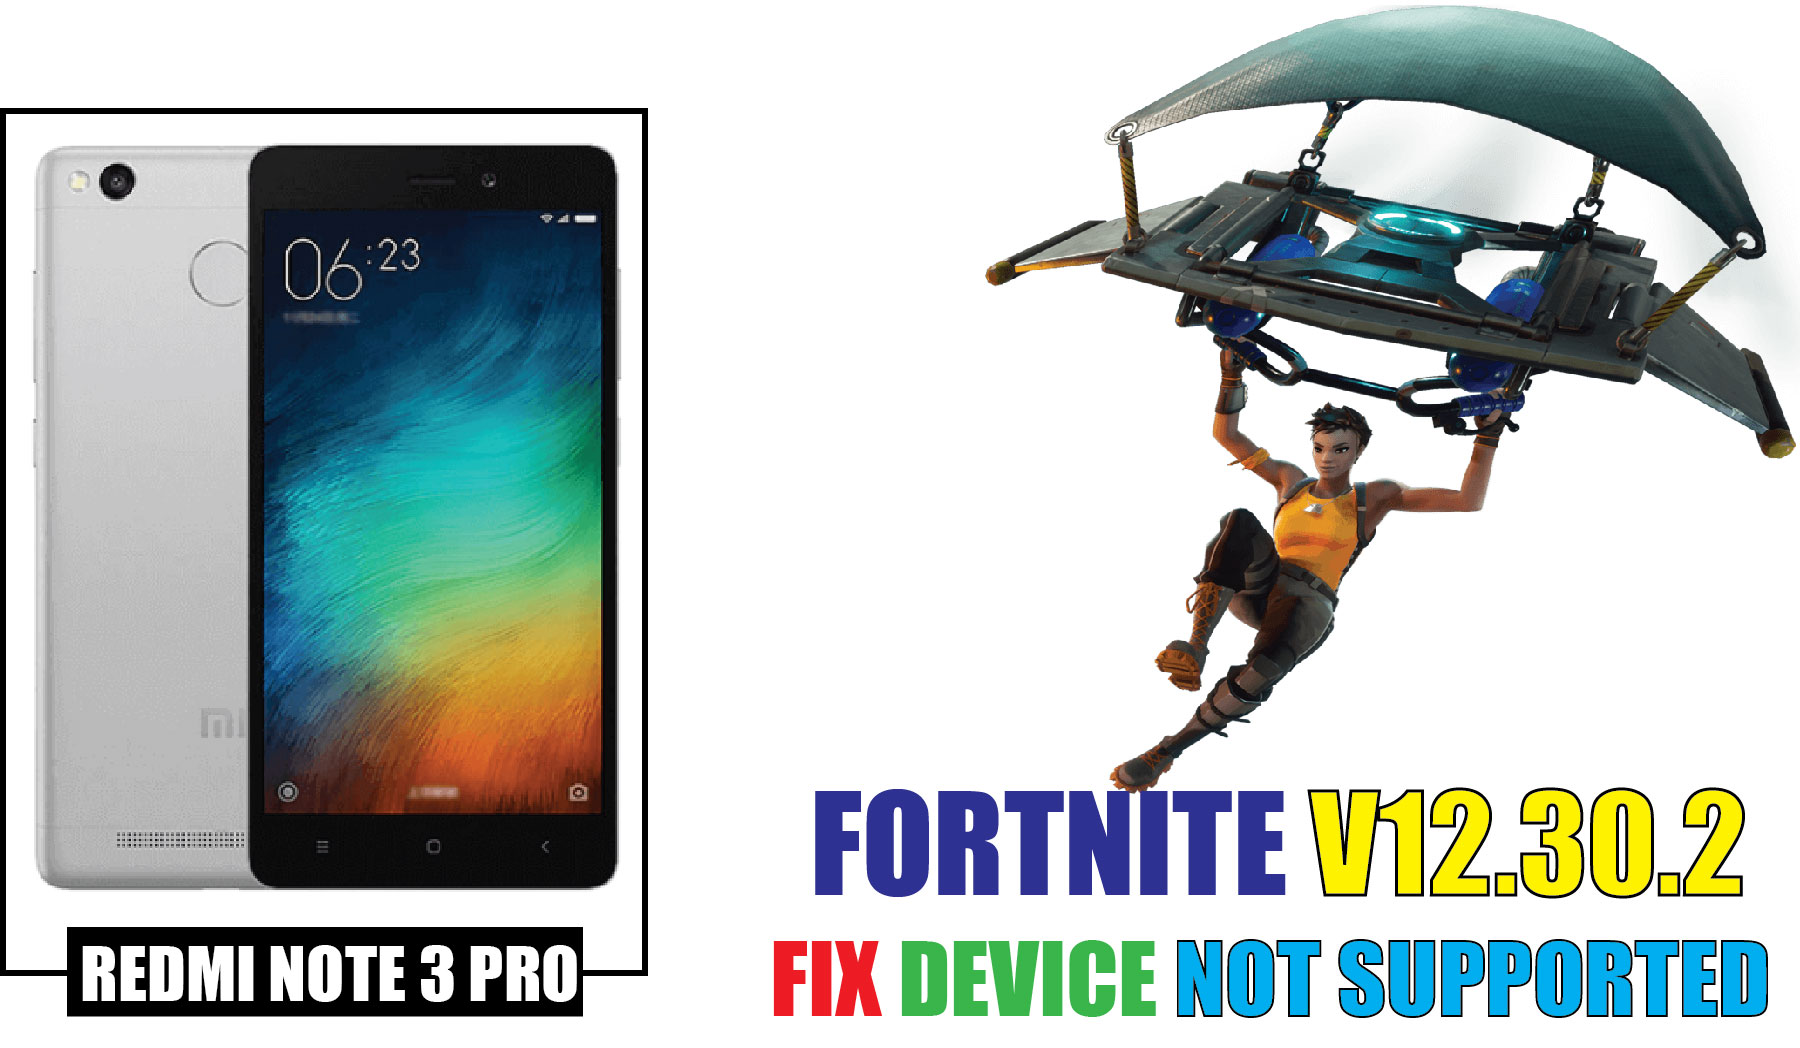 Fortnite For Redmi Note 3 How To Install Fortnite Apk Fix Device Not Supported For Xiaomi Redmi Note 3 Pro Gsm Full Info